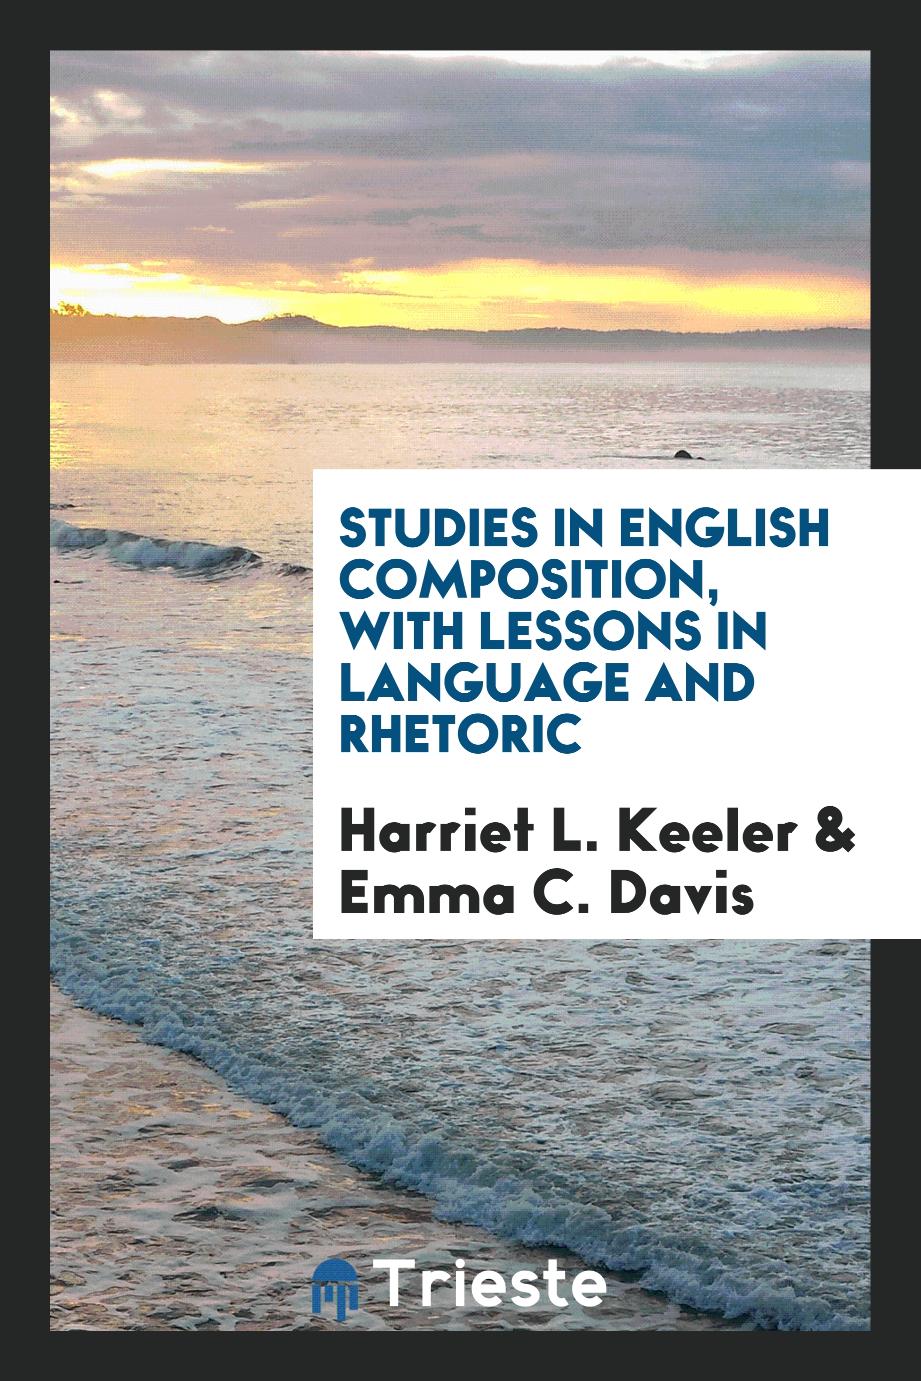 Studies in English composition, with lessons in language and rhetoric